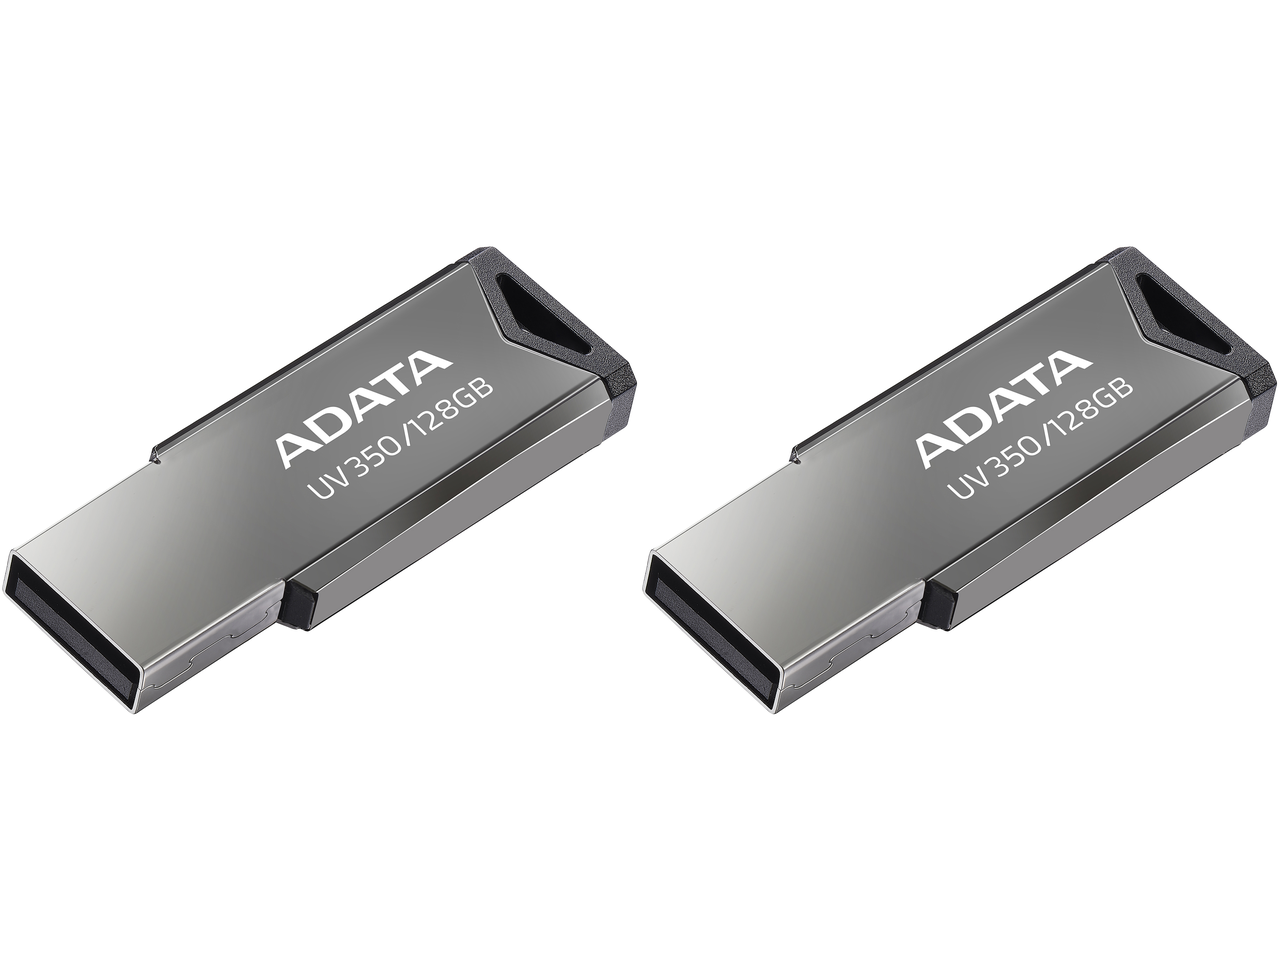 ADATA USB Flash Drives 3.2 Gen 1: 32GB for $3.50 and 128GB for $8.50 when bought as combo packs from newegg